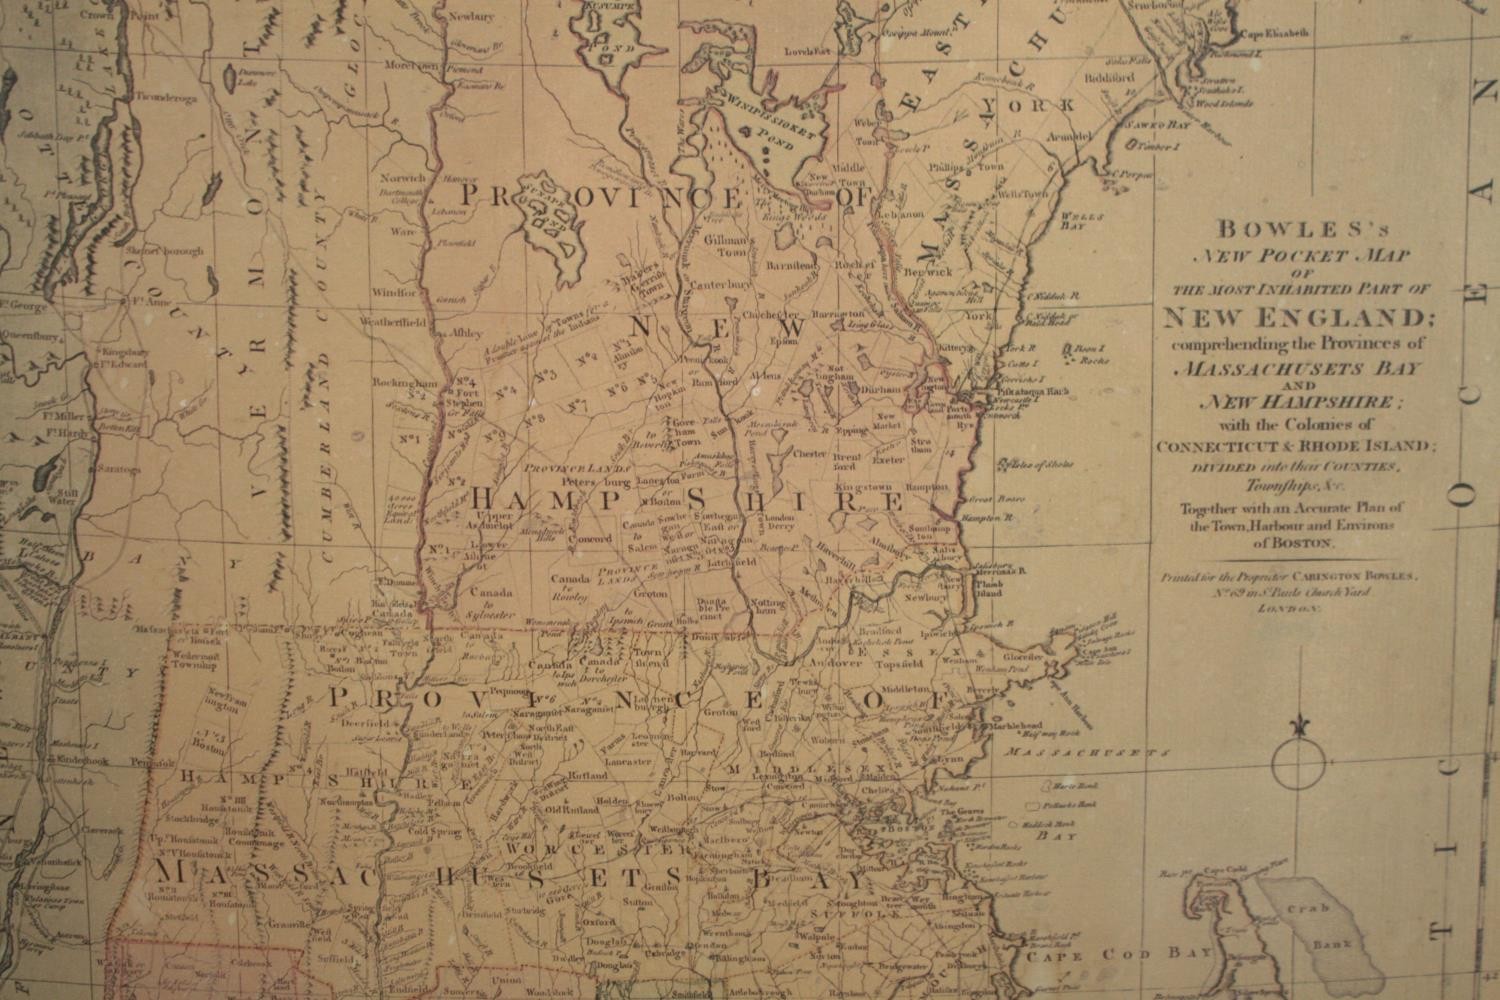 'Bowles's new pocket map of the most inhabited part of New England; comprehending the provinces of - Image 3 of 4